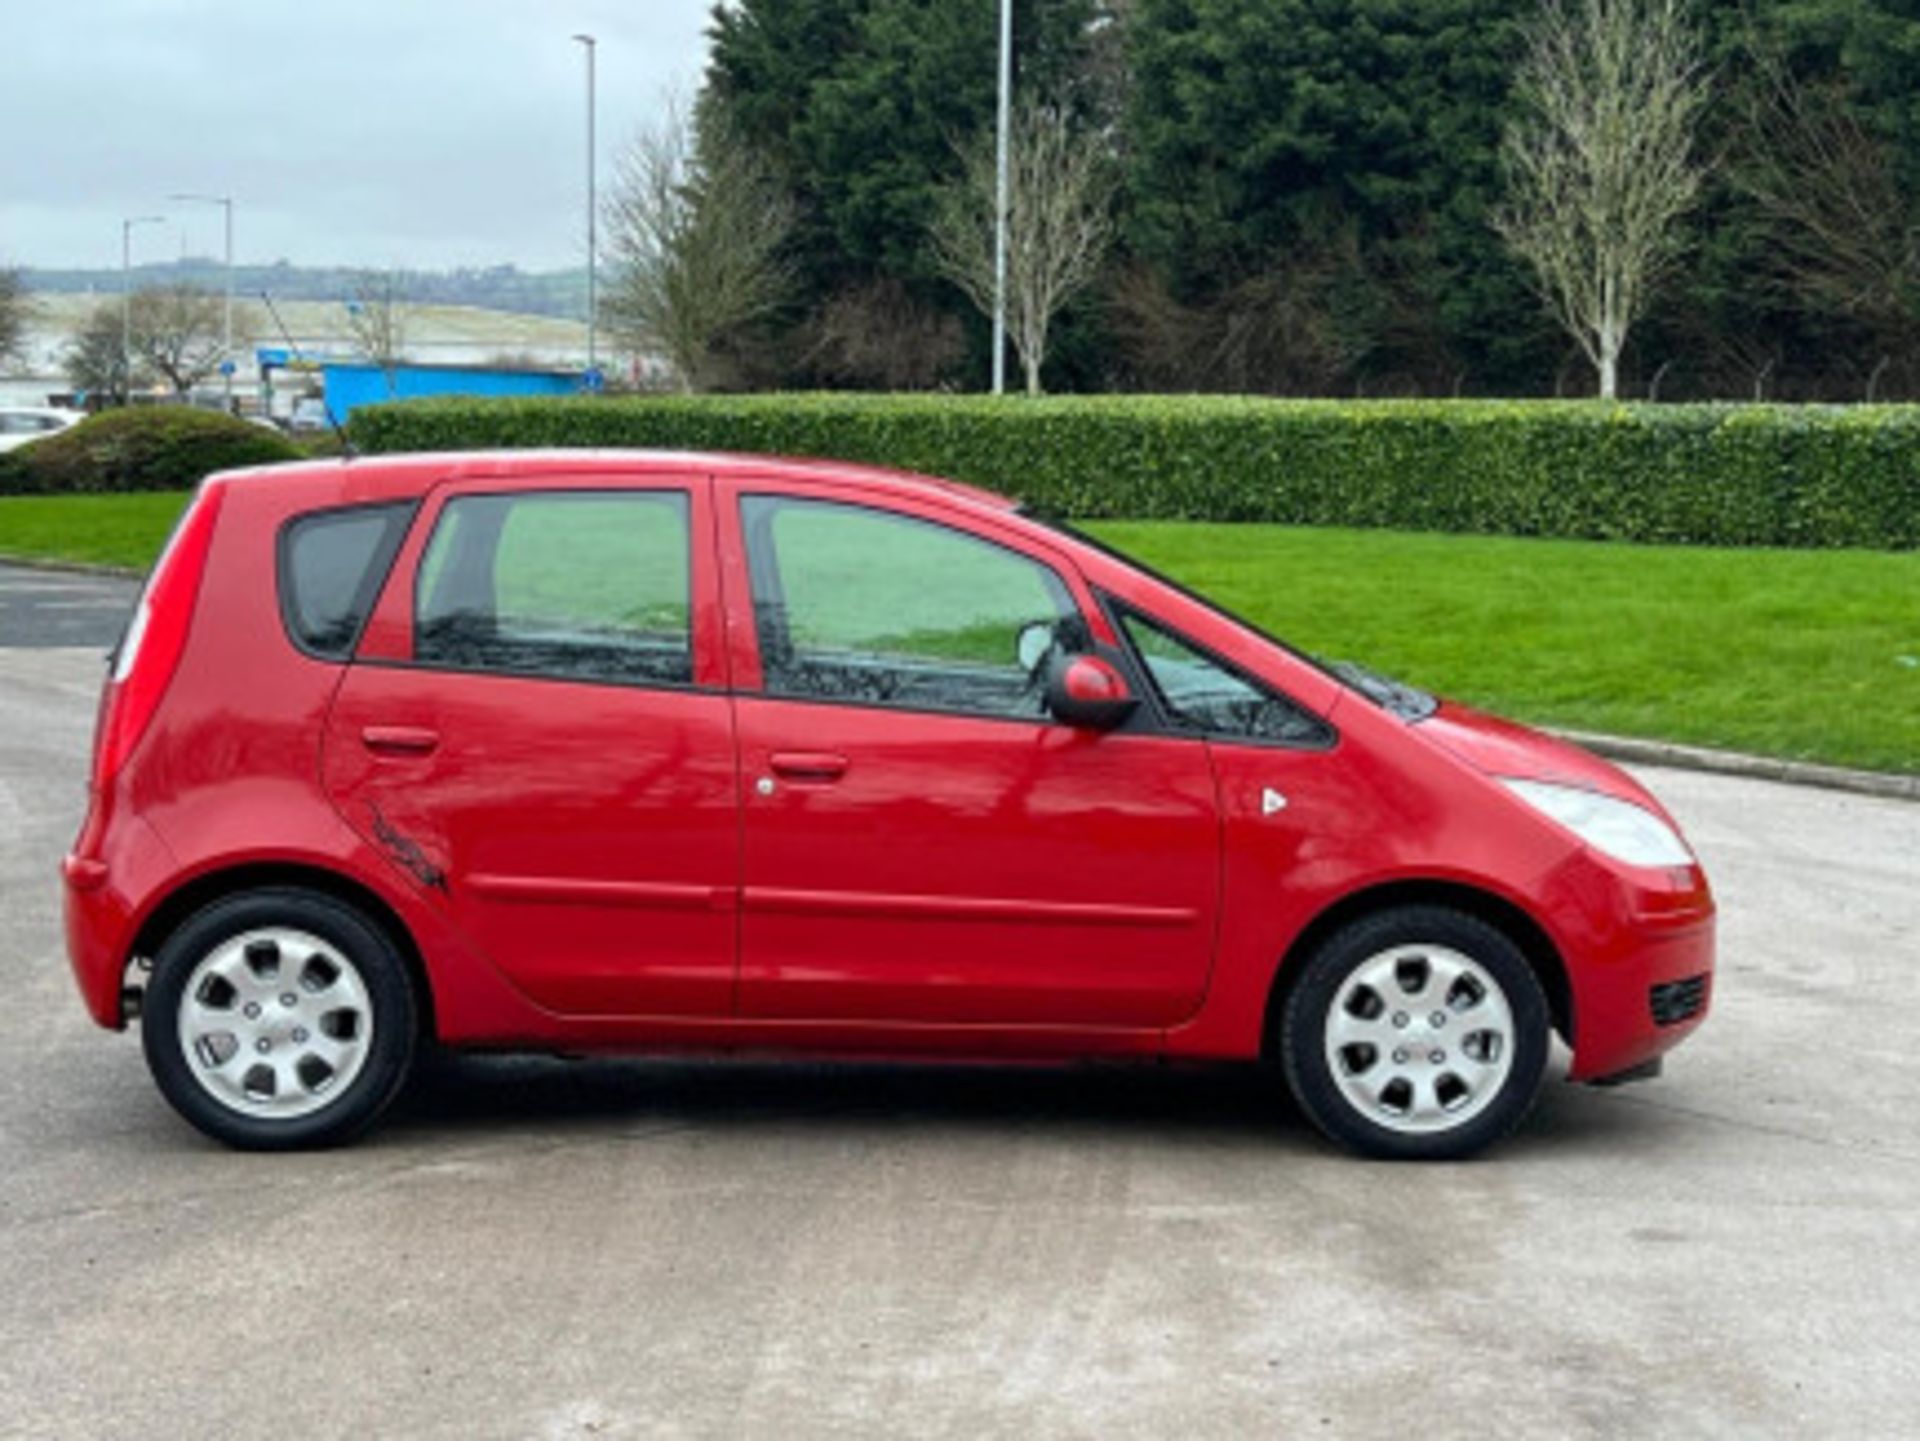 2007 MITSUBISHI COLT 1.5 DI-D DIESEL AUTOMATIC >>--NO VAT ON HAMMER--<< - Image 17 of 127